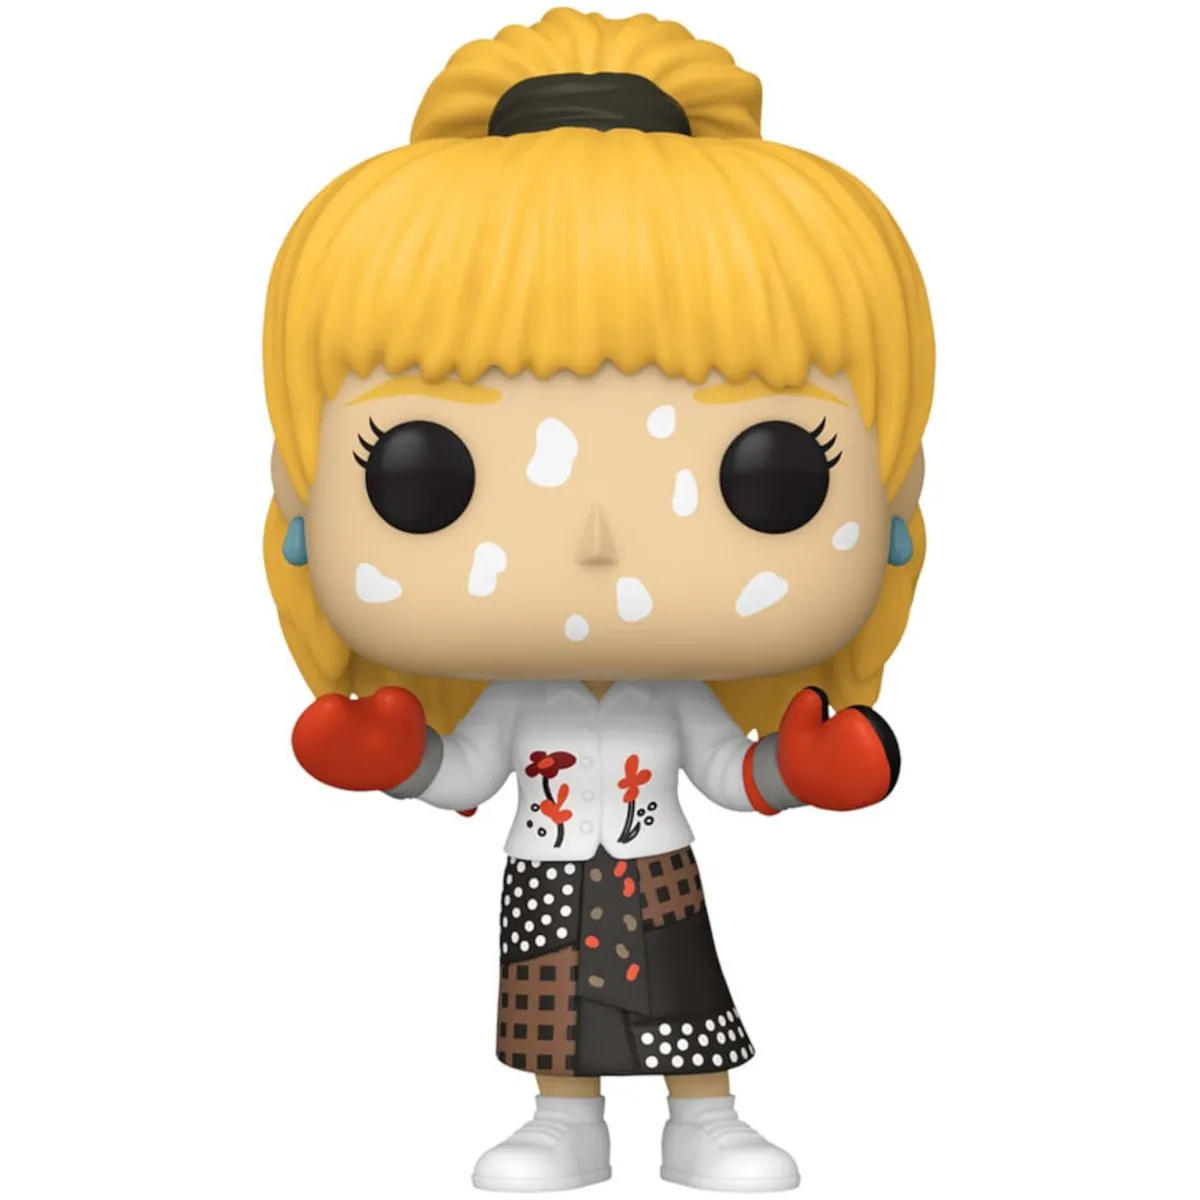 65677 Funko Pop! Television - Friends - Phoebe Buffay with Chicken Pox Collectable Vinyl Figure